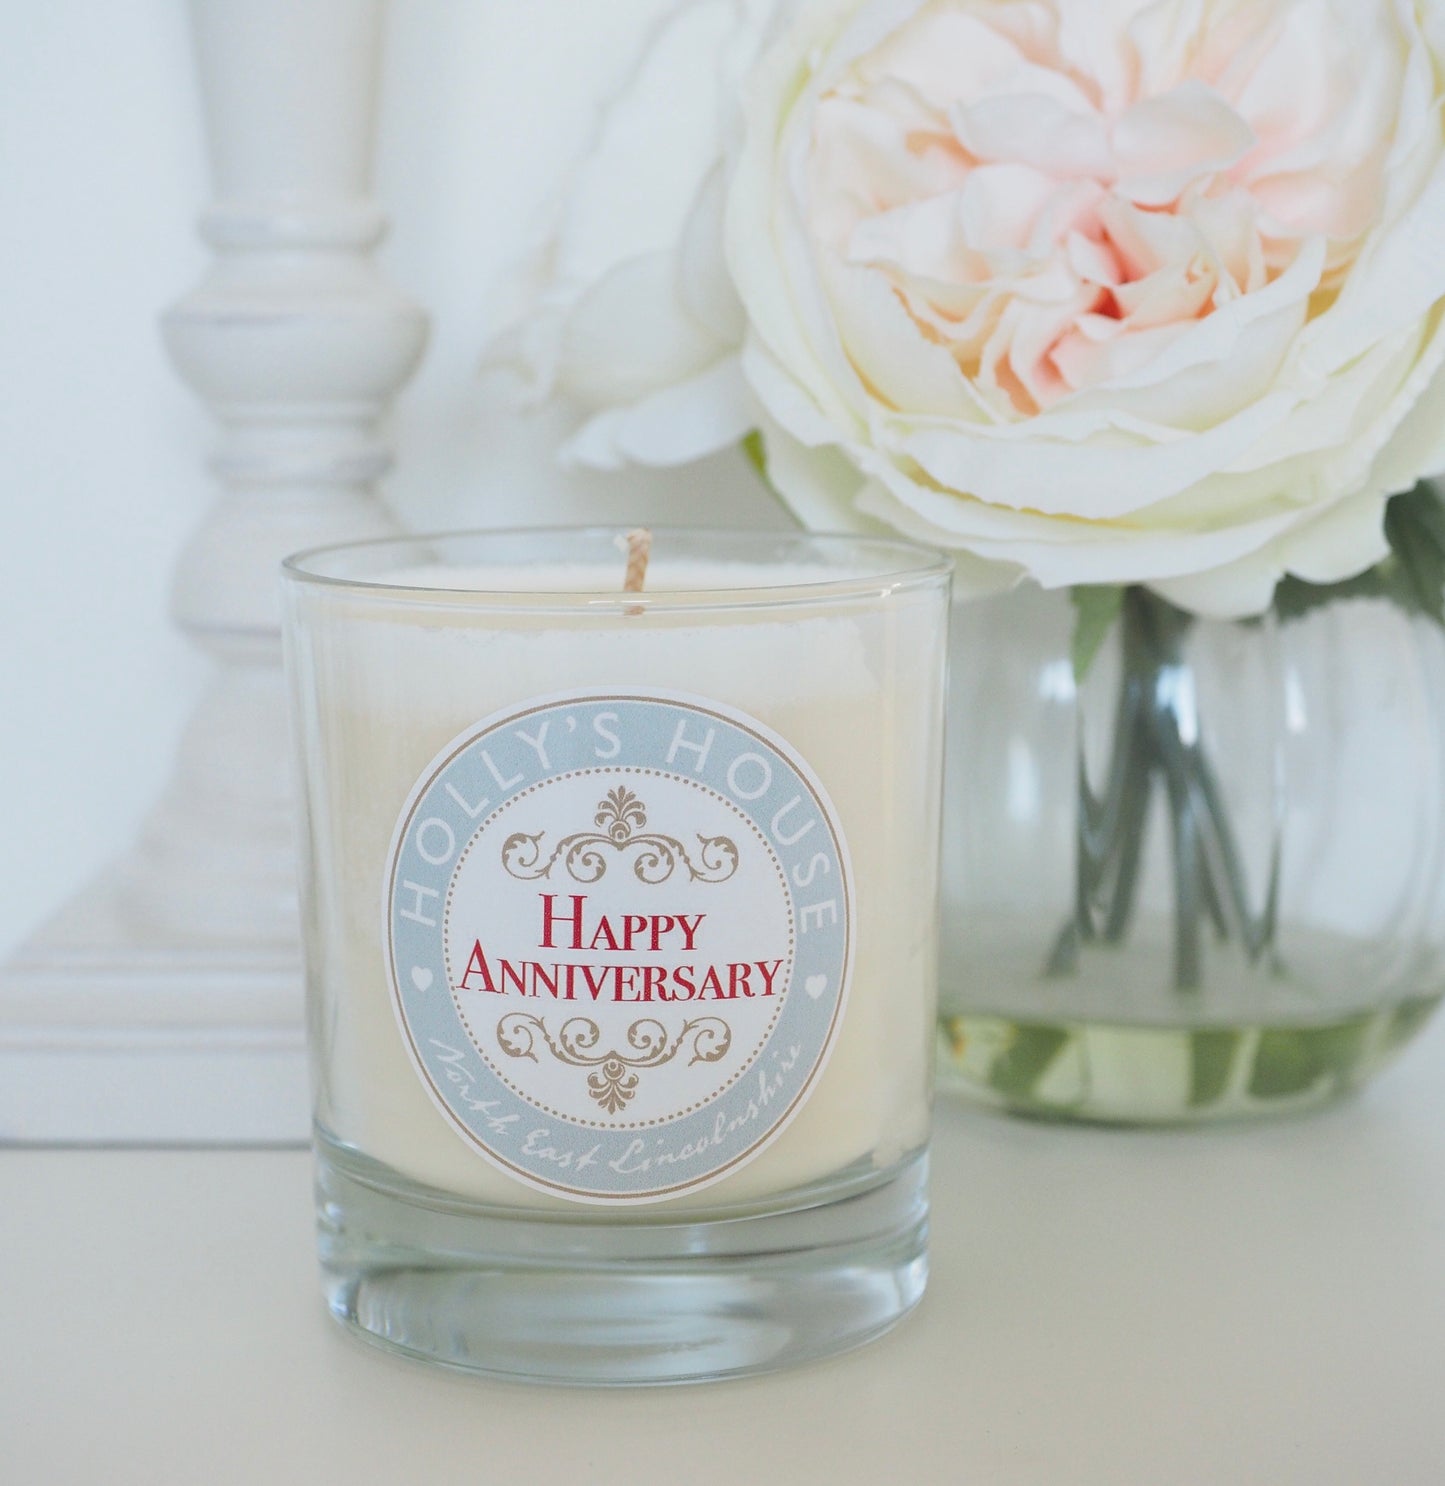 Happy Anniversary Scented Candle